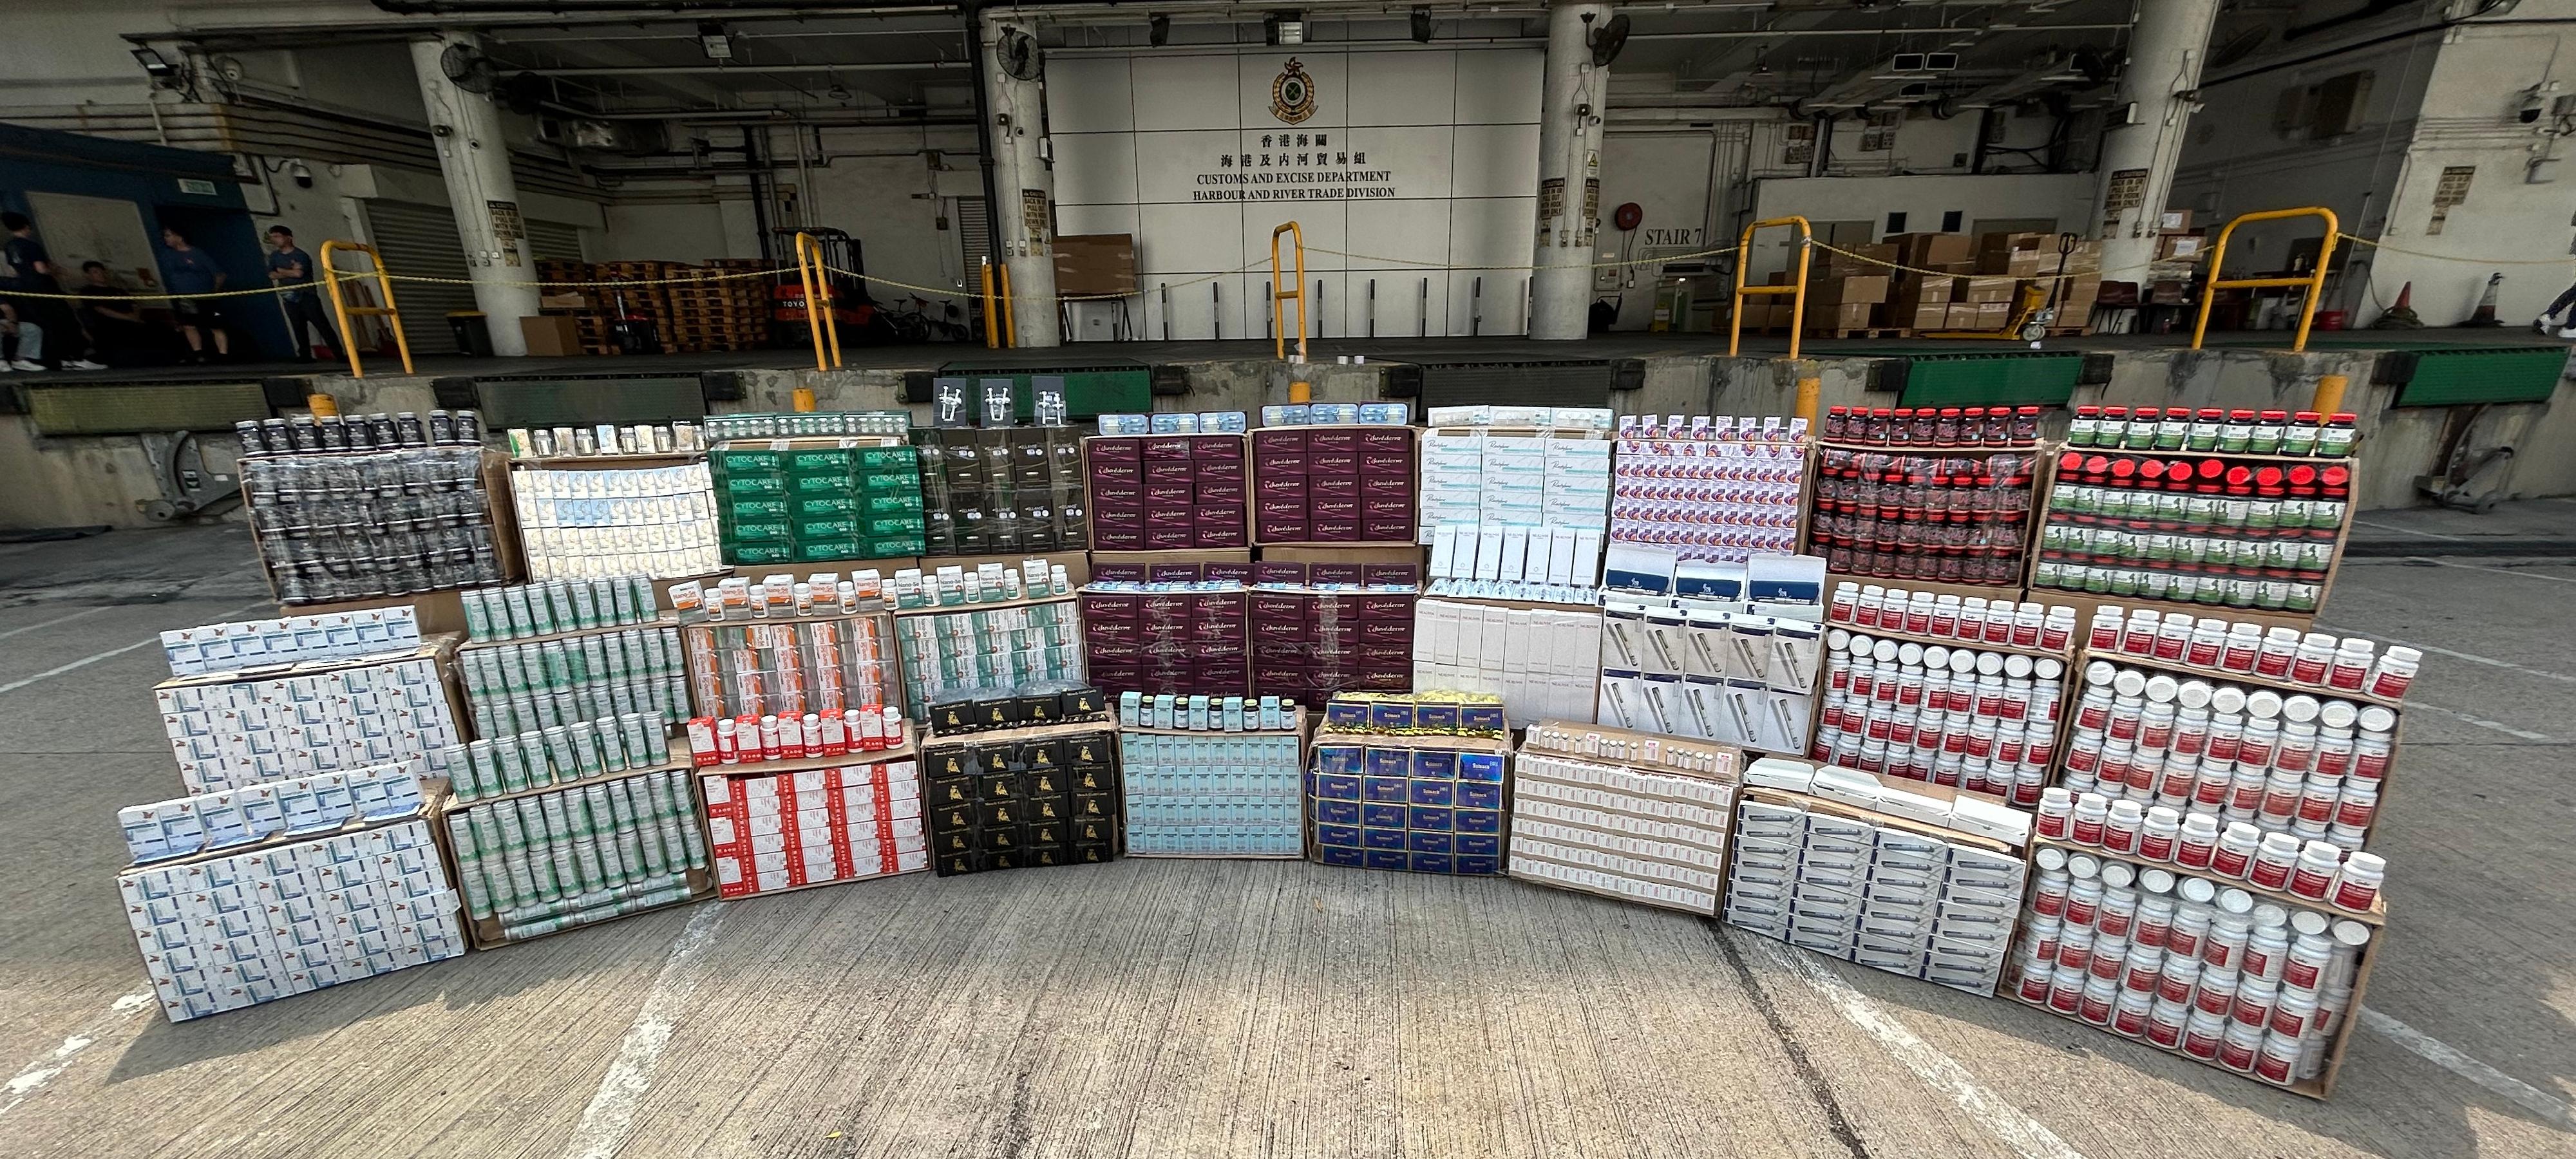 Hong Kong Customs on April 2 detected a suspected smuggling case involving a river trade vessel. A large batch of suspected smuggled goods, including beauty needles, health products and pharmaceutical products, with a total estimated market value of about $20 million was seized. Photo shows the suspected smuggled goods seized.